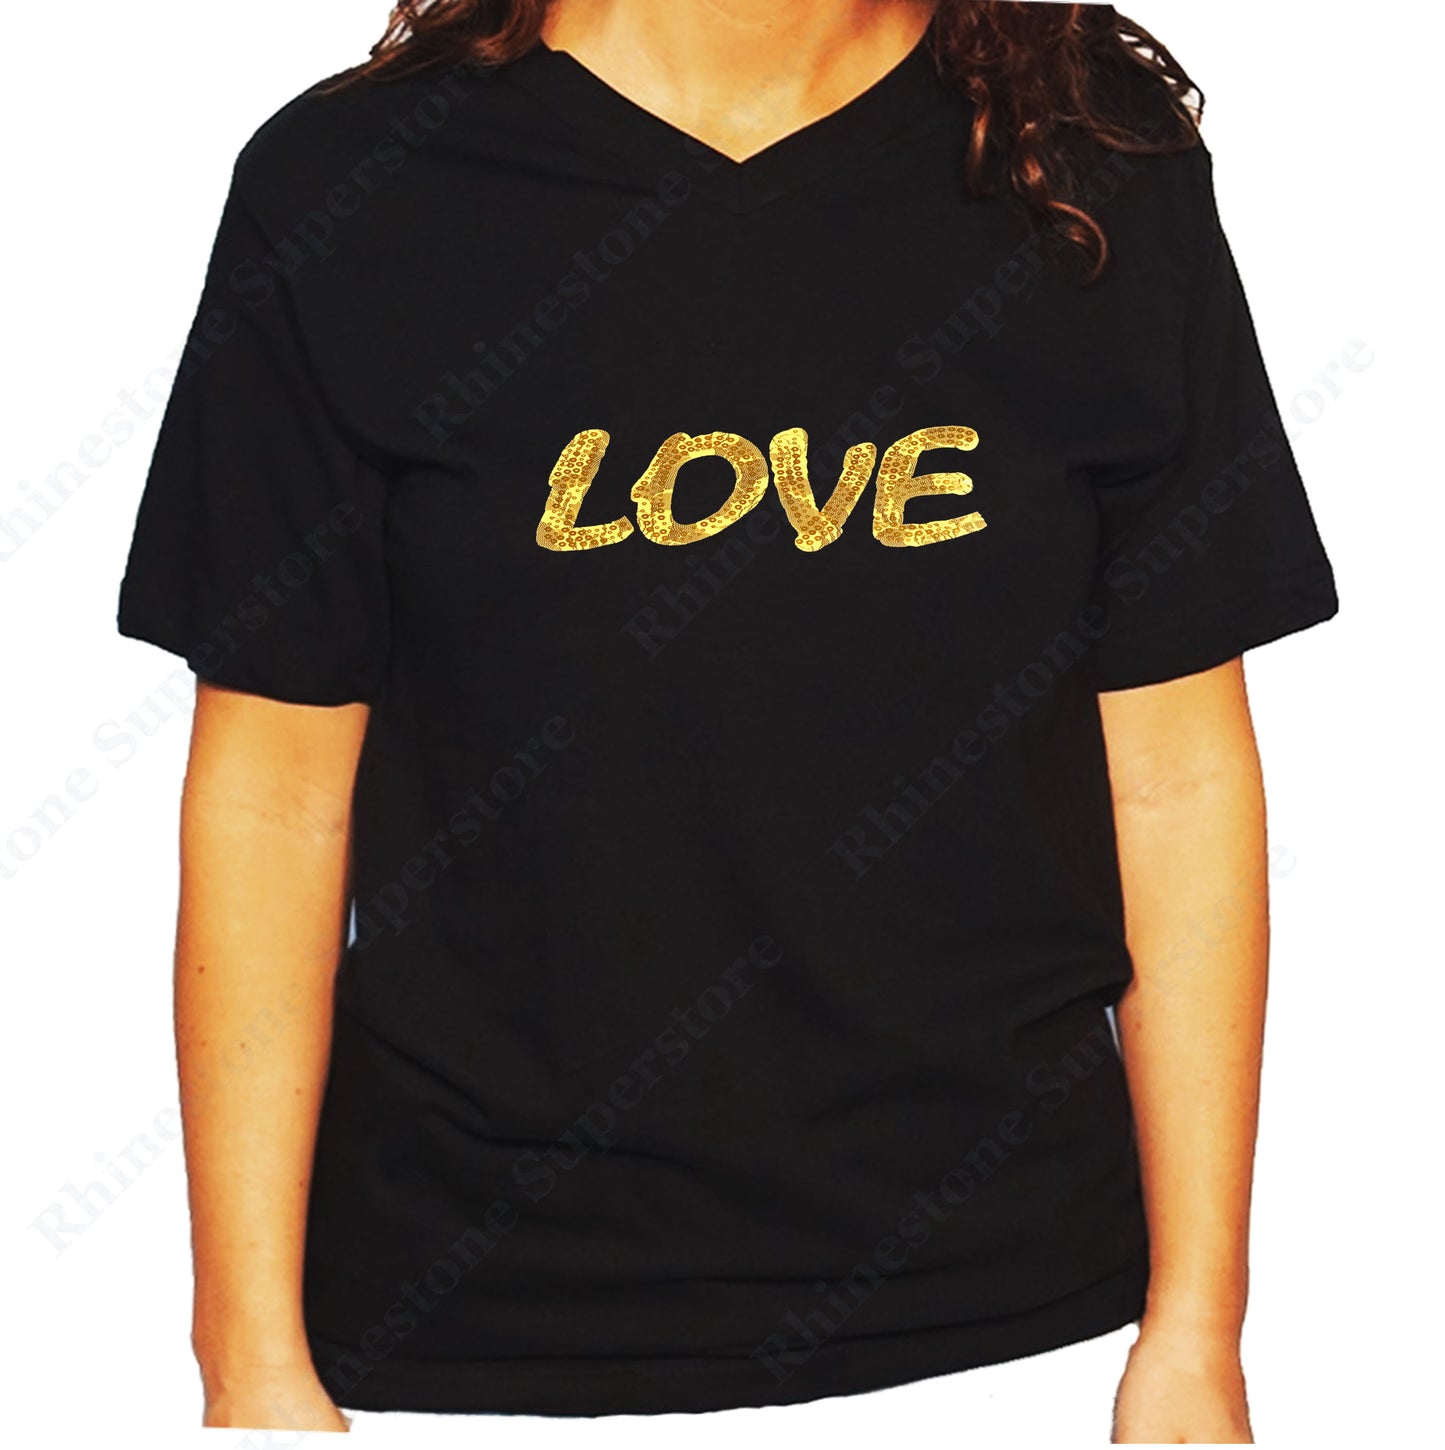 Women's / Unisex T-Shirt with Gold Love in Lace and Spangles